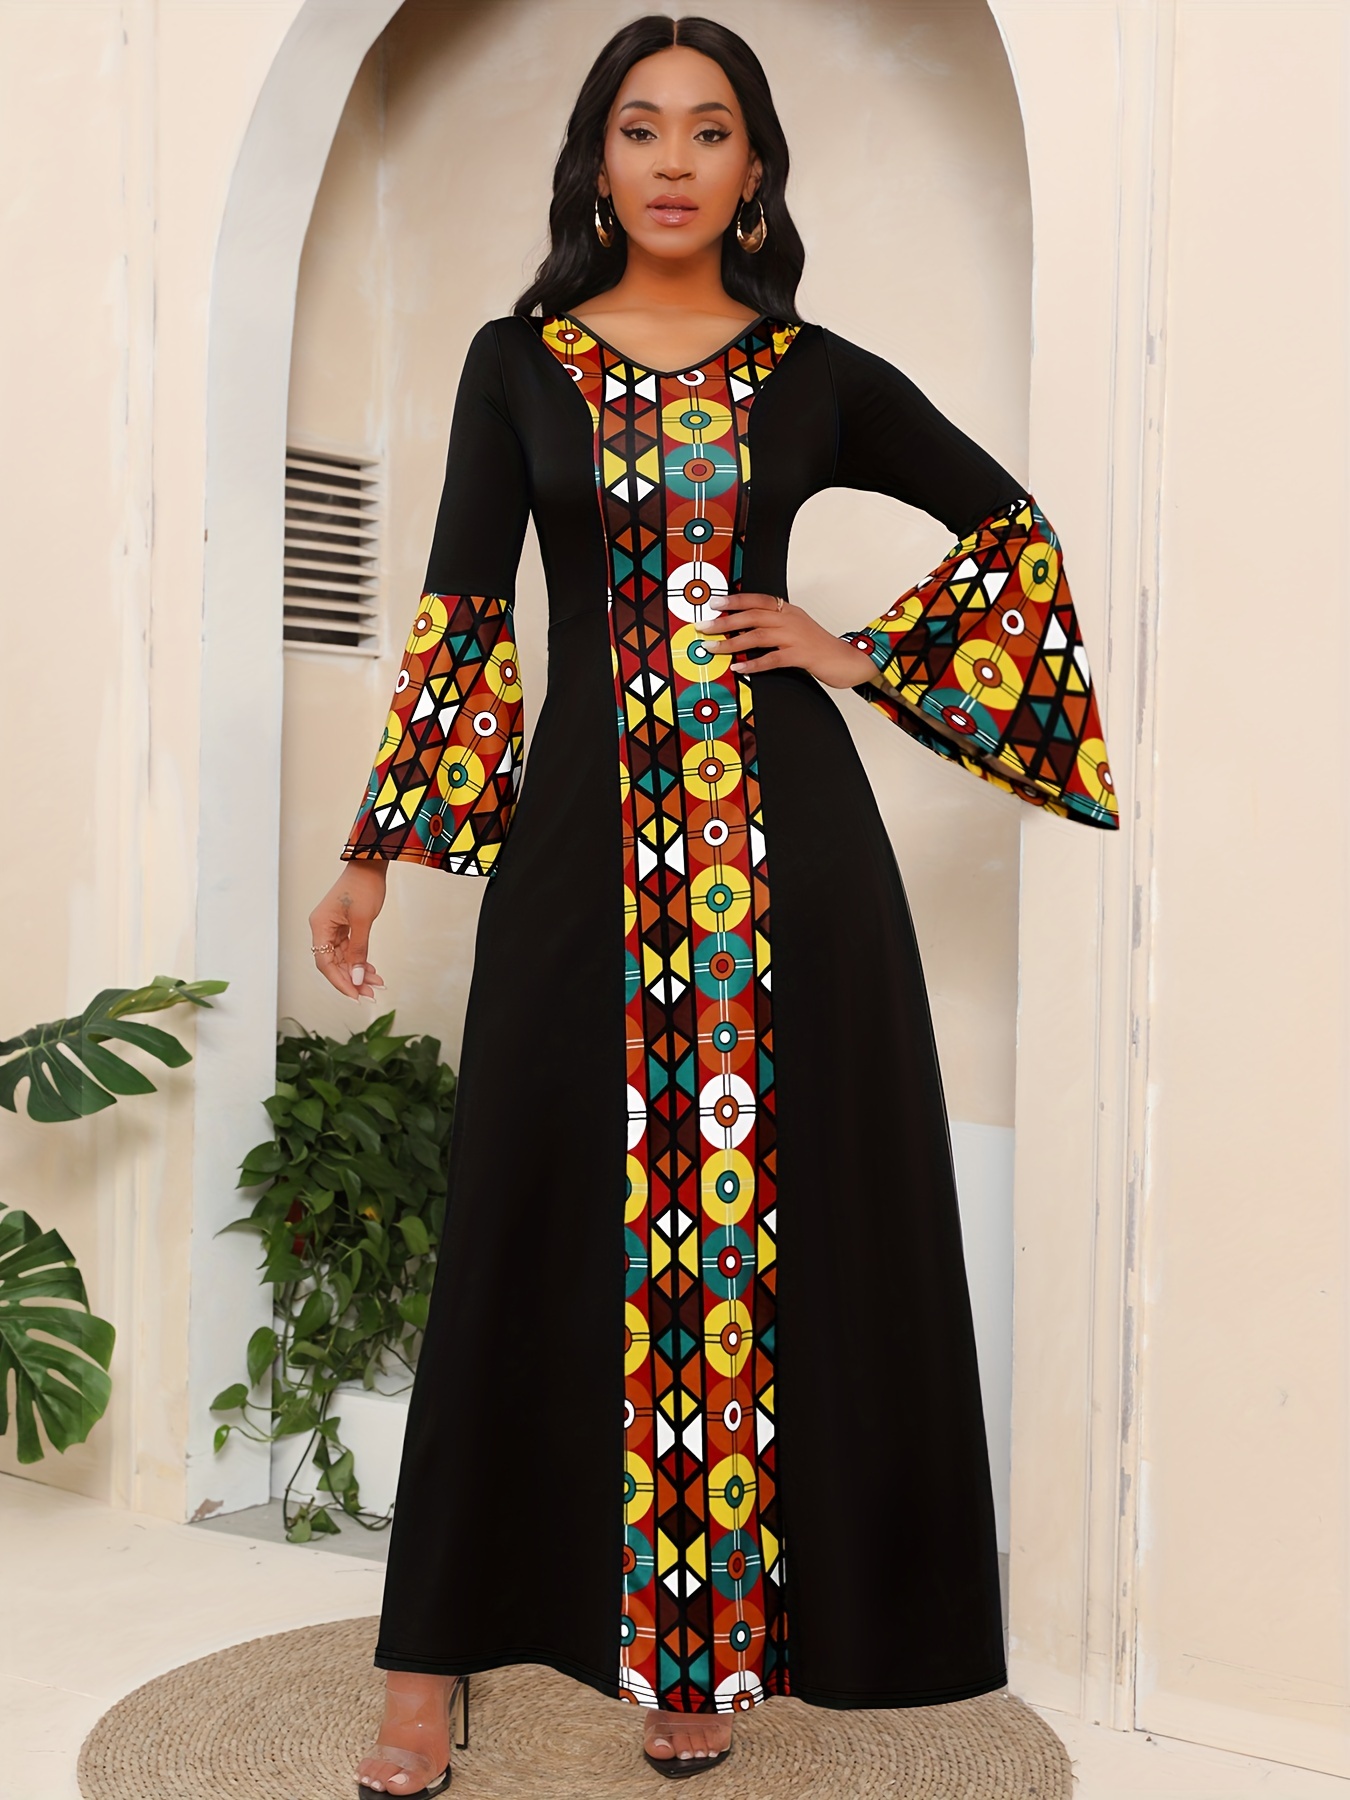 African Three Quarter Dress, African Clothing for Women, African Print  Wedding Dress, African Print Dress for Wedding,african Formal Dress 